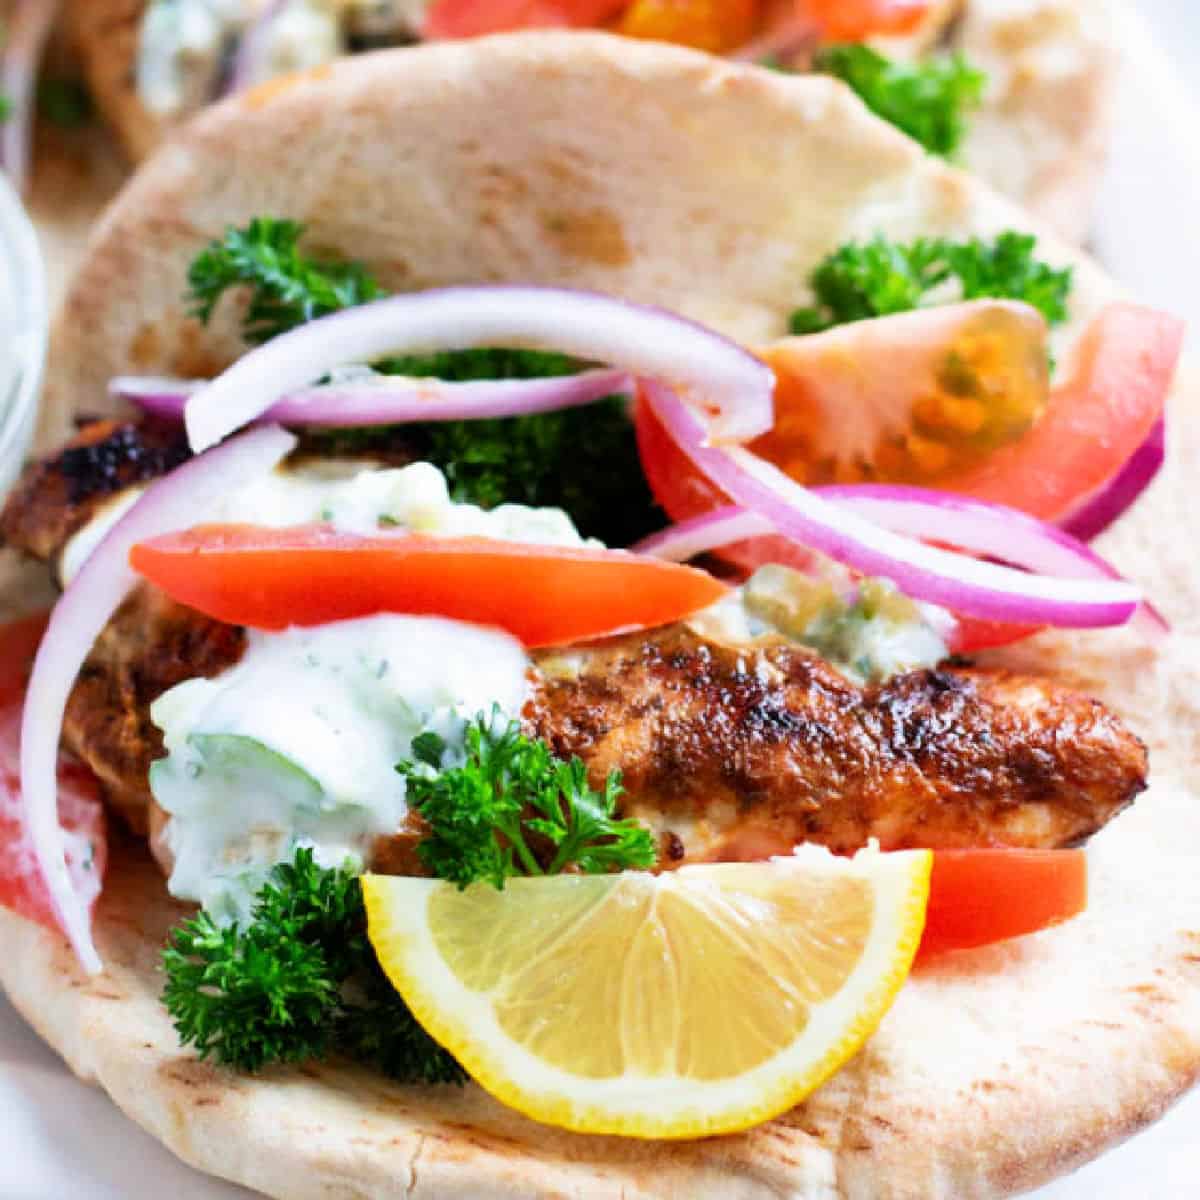 This chicken gyro recipe is easy and exceptionally delicious. The marinade makes the chicken extra flavorful and juicy. Stuff it into a pita with fresh veggies and homemade tzatziki for a fabulous Greek deliciousness!